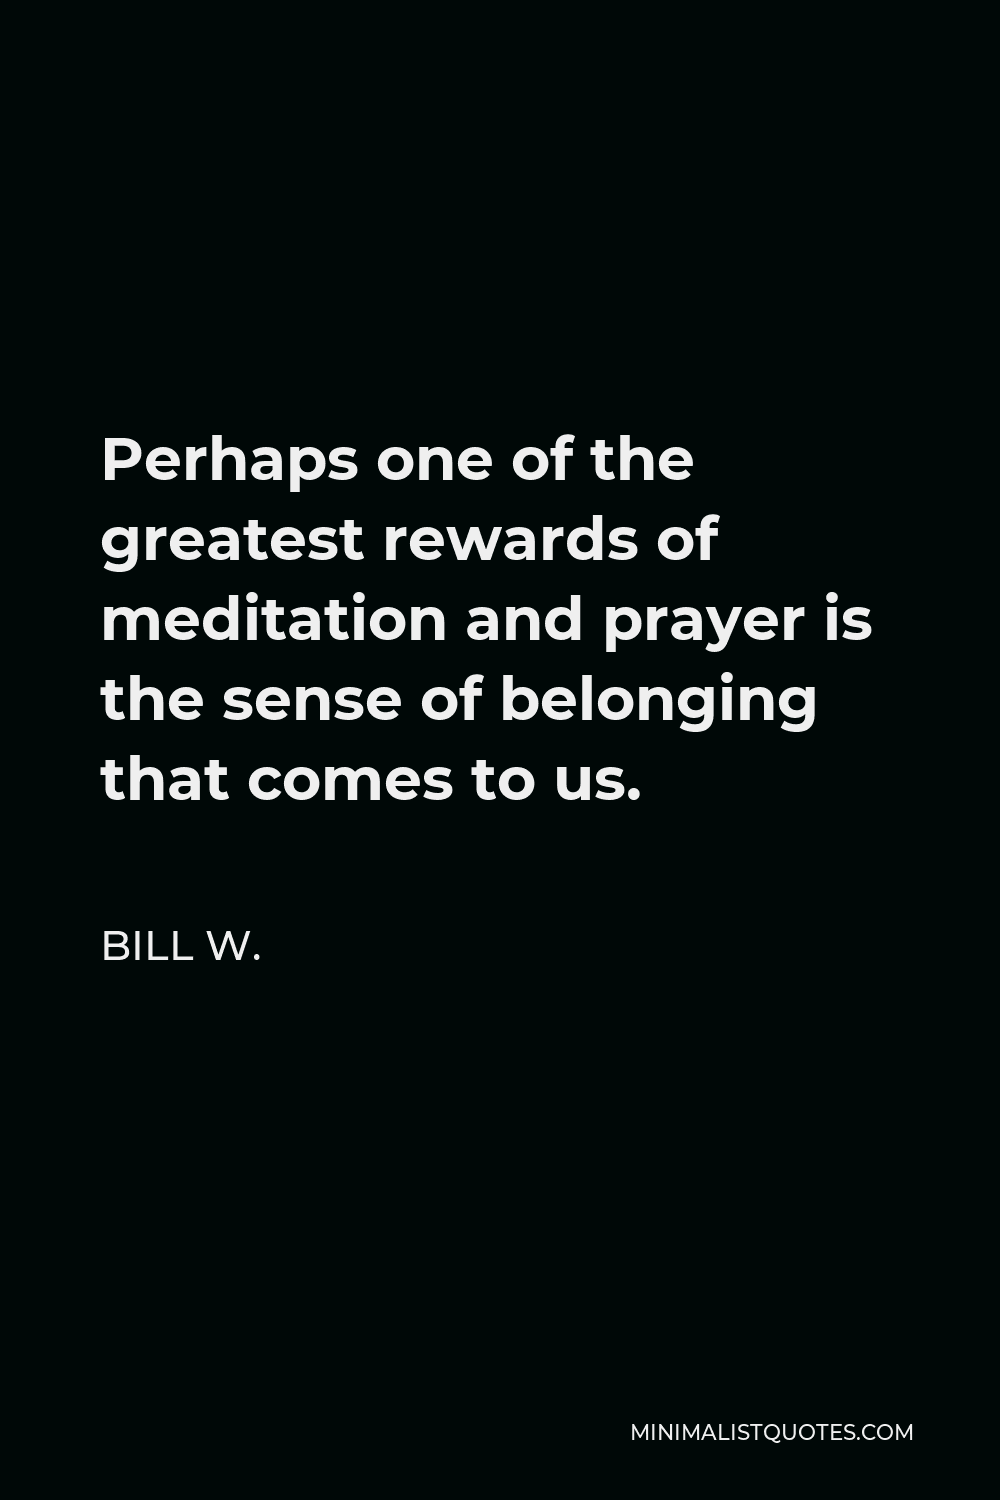 Bill W. Quote - Perhaps one of the greatest rewards of meditation and prayer is the sense of belonging that comes to us.